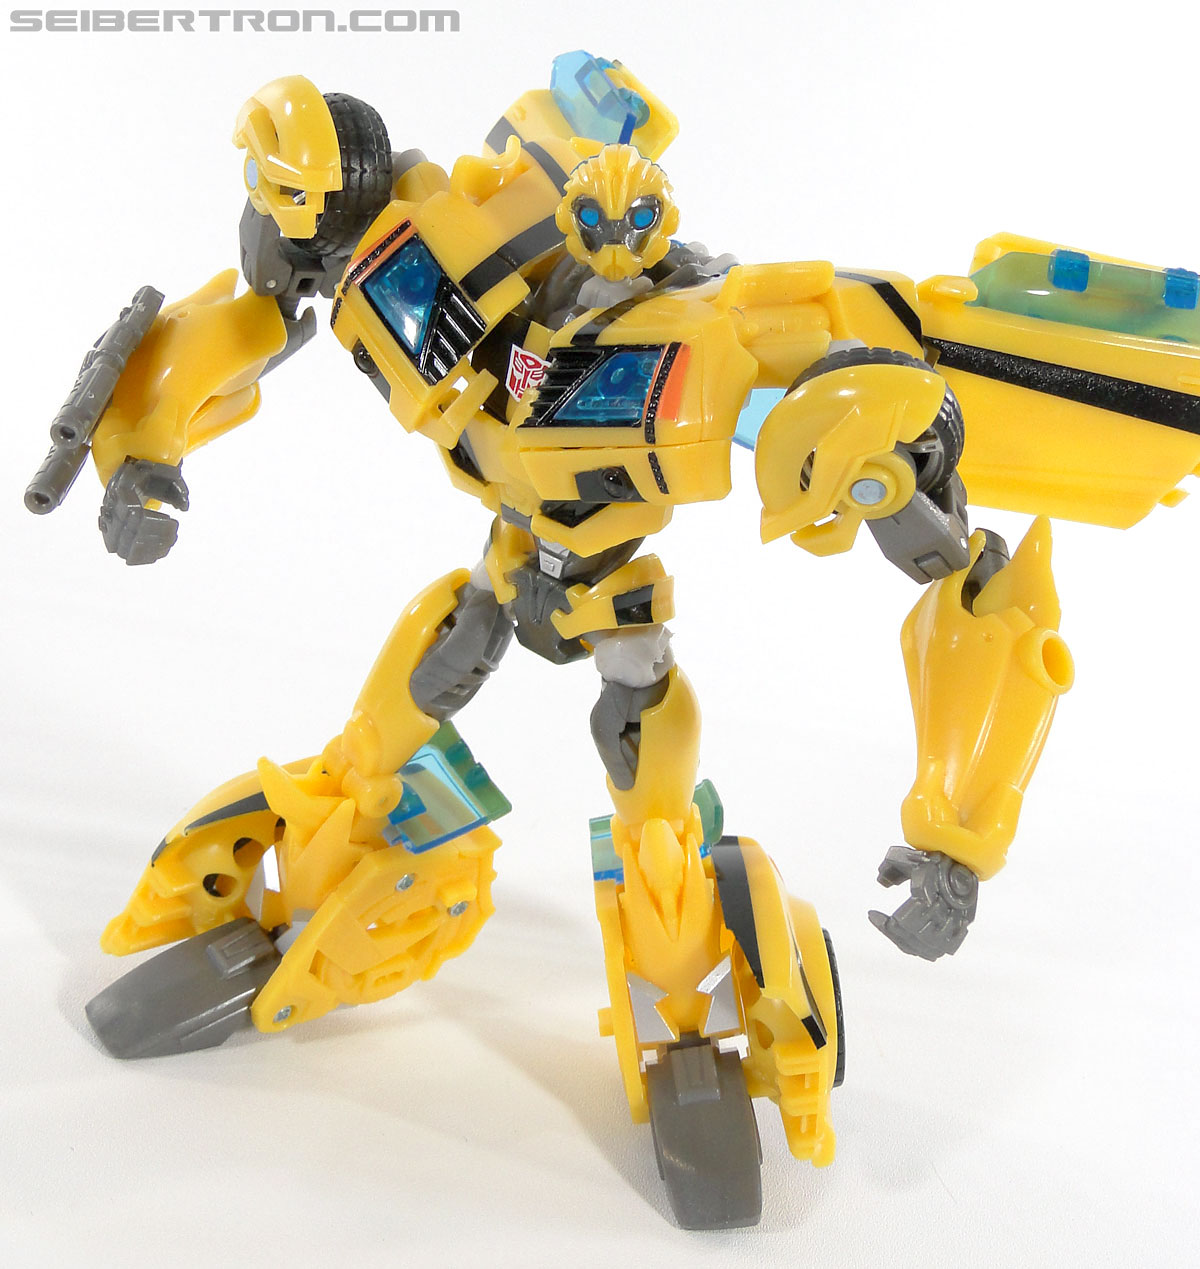 Transformers Prime: First Edition Bumblebee (Image #73 of 130)